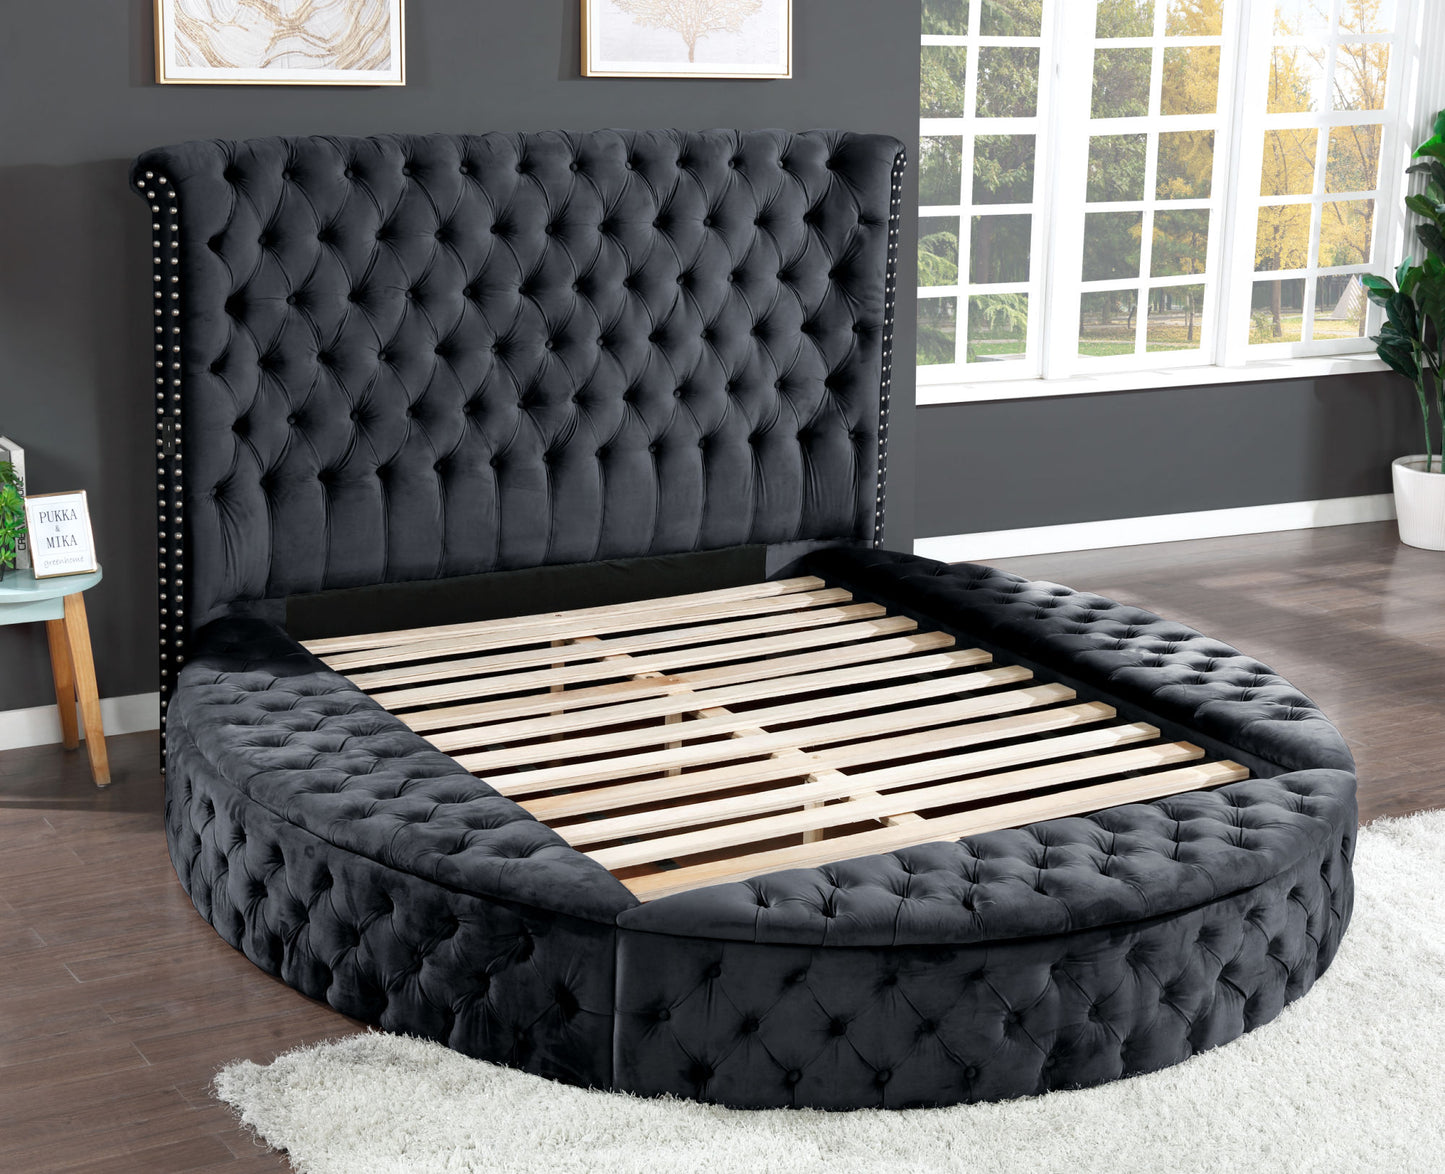 hazel queen size tufted upholstery storage bed made with wood in black